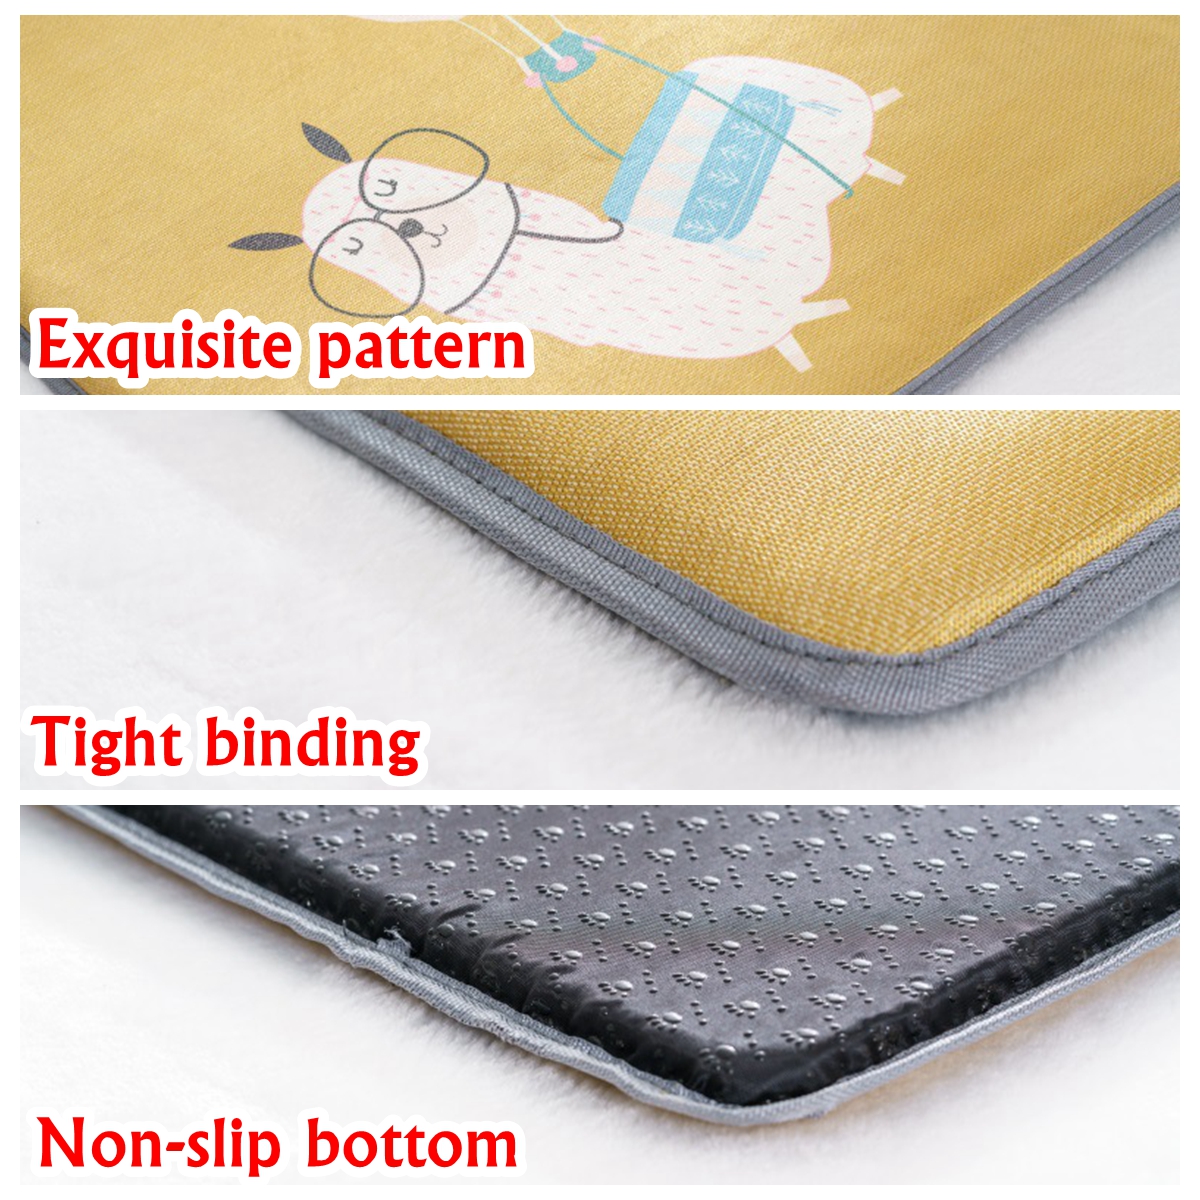 SMLXL-Ice-Silk-Summer-Cooling-Pet-Dog-Cat-Puppy-Cushion-Mat-Pad-Home-1550150-2